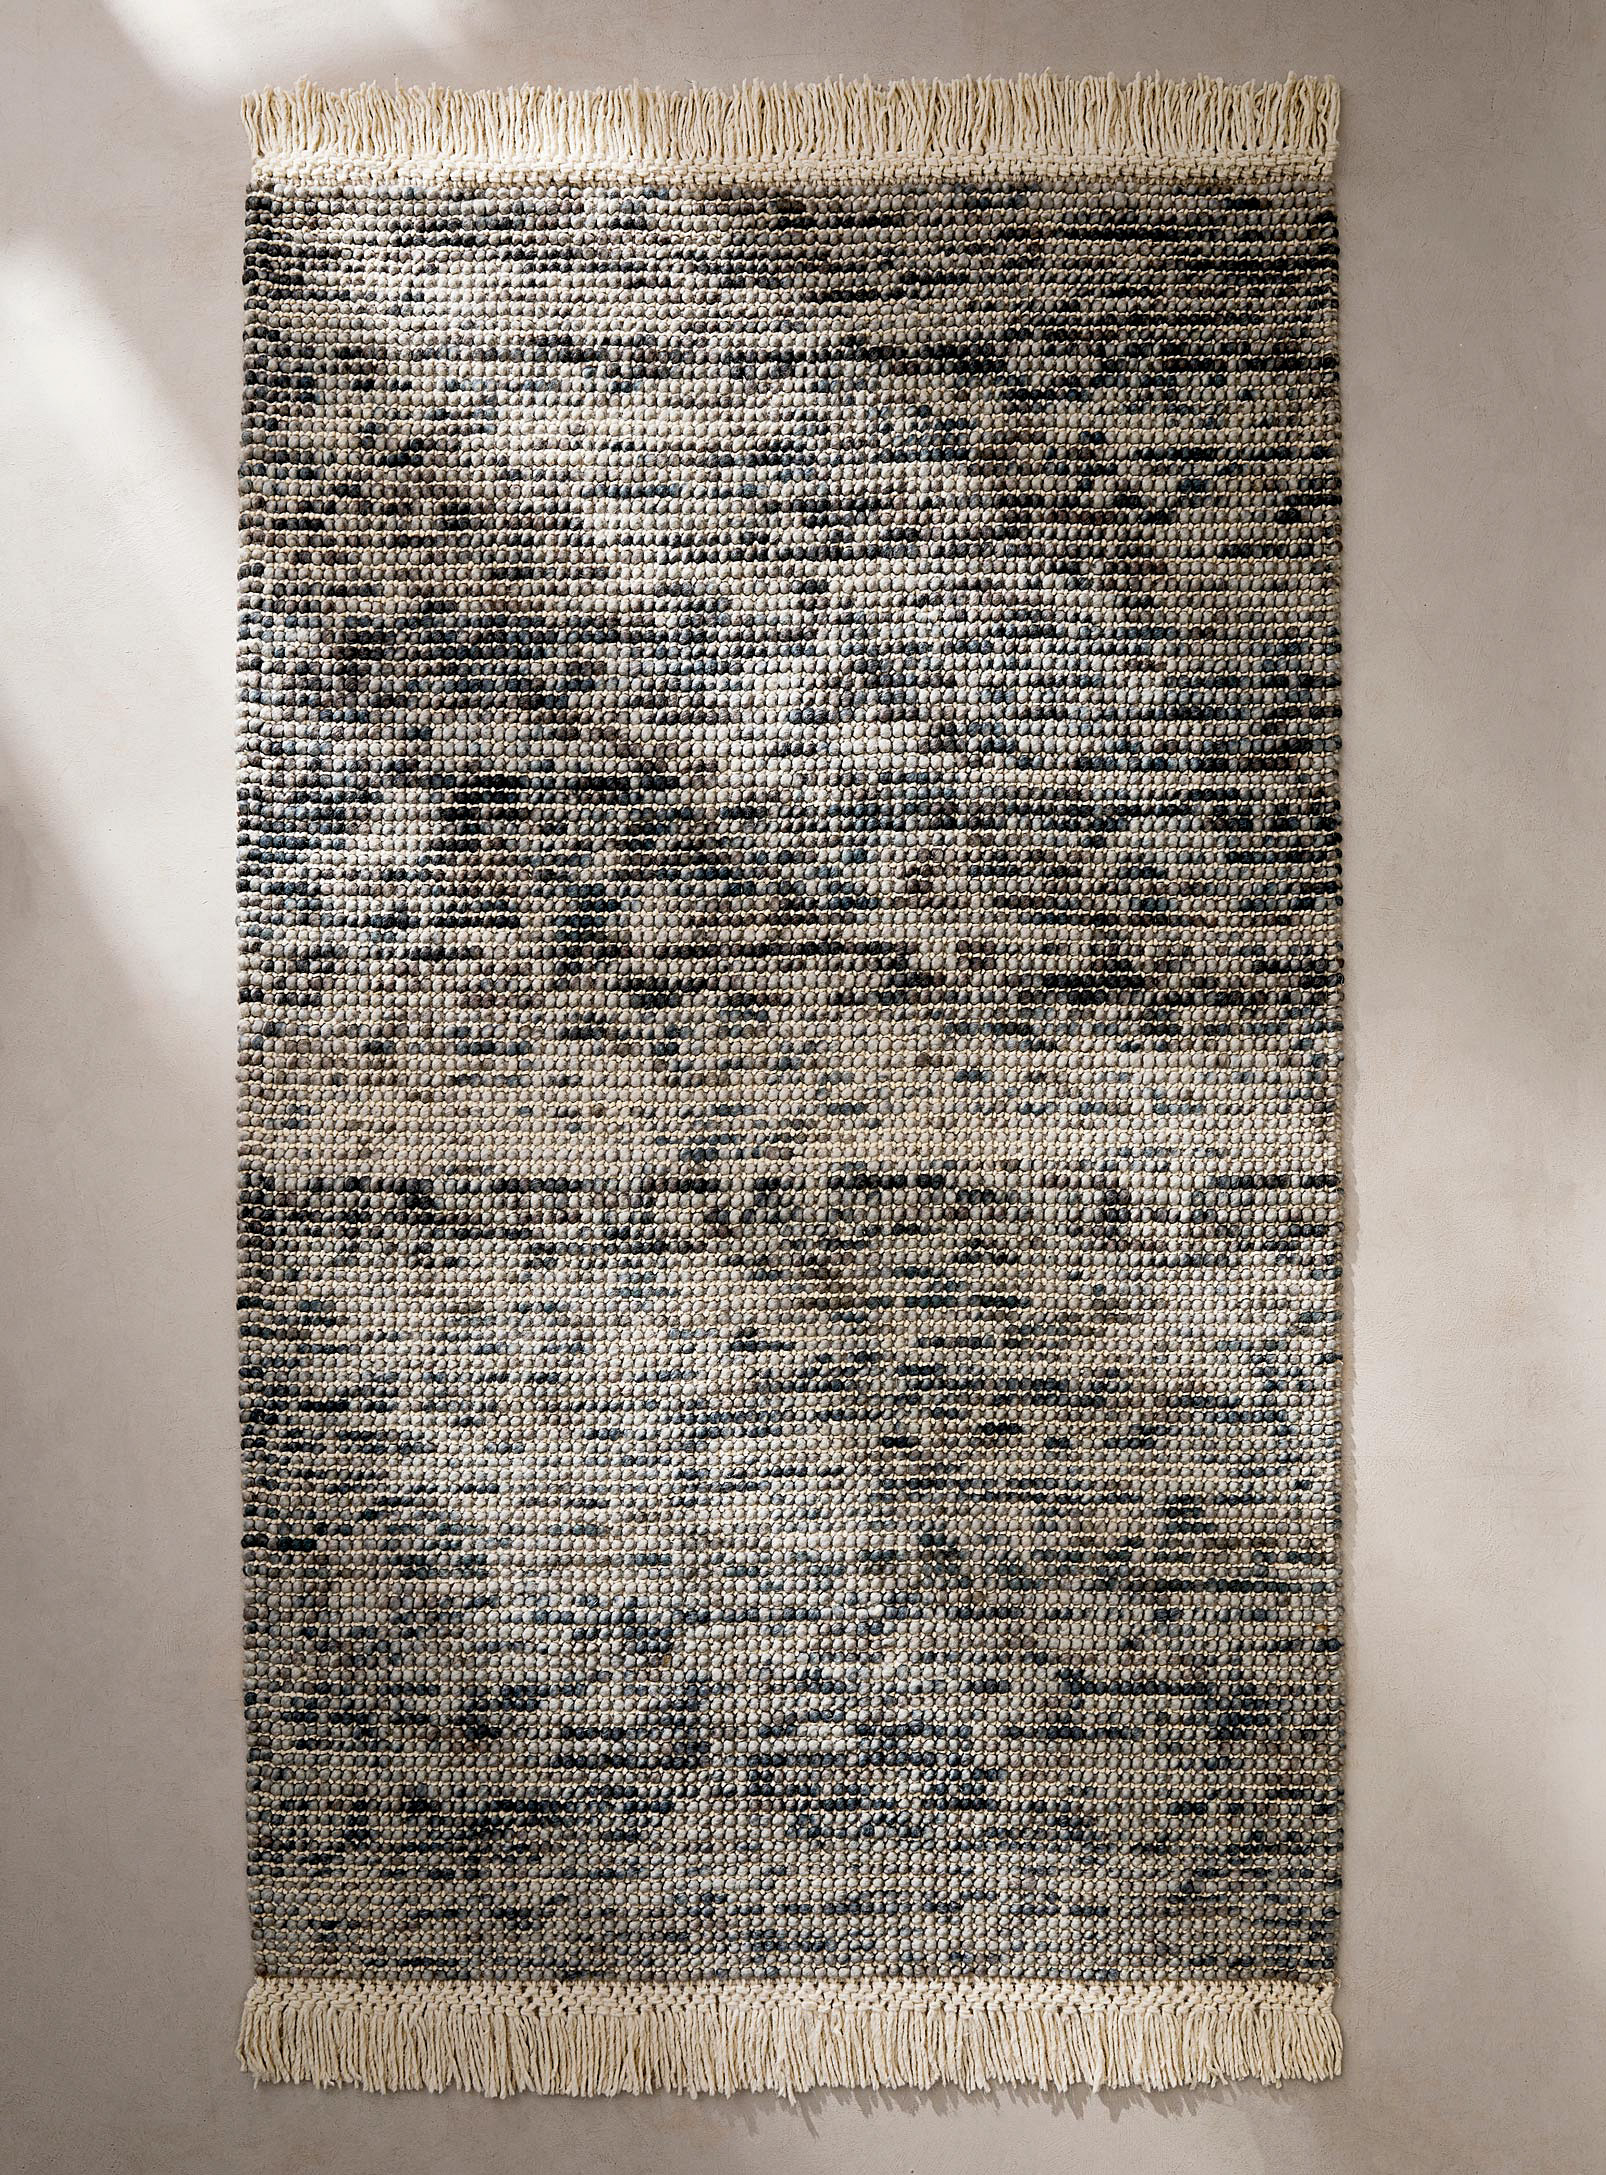 Simons Maison Freshwater Stones Artisanal Rug See Available Sizes In Patterned Grey